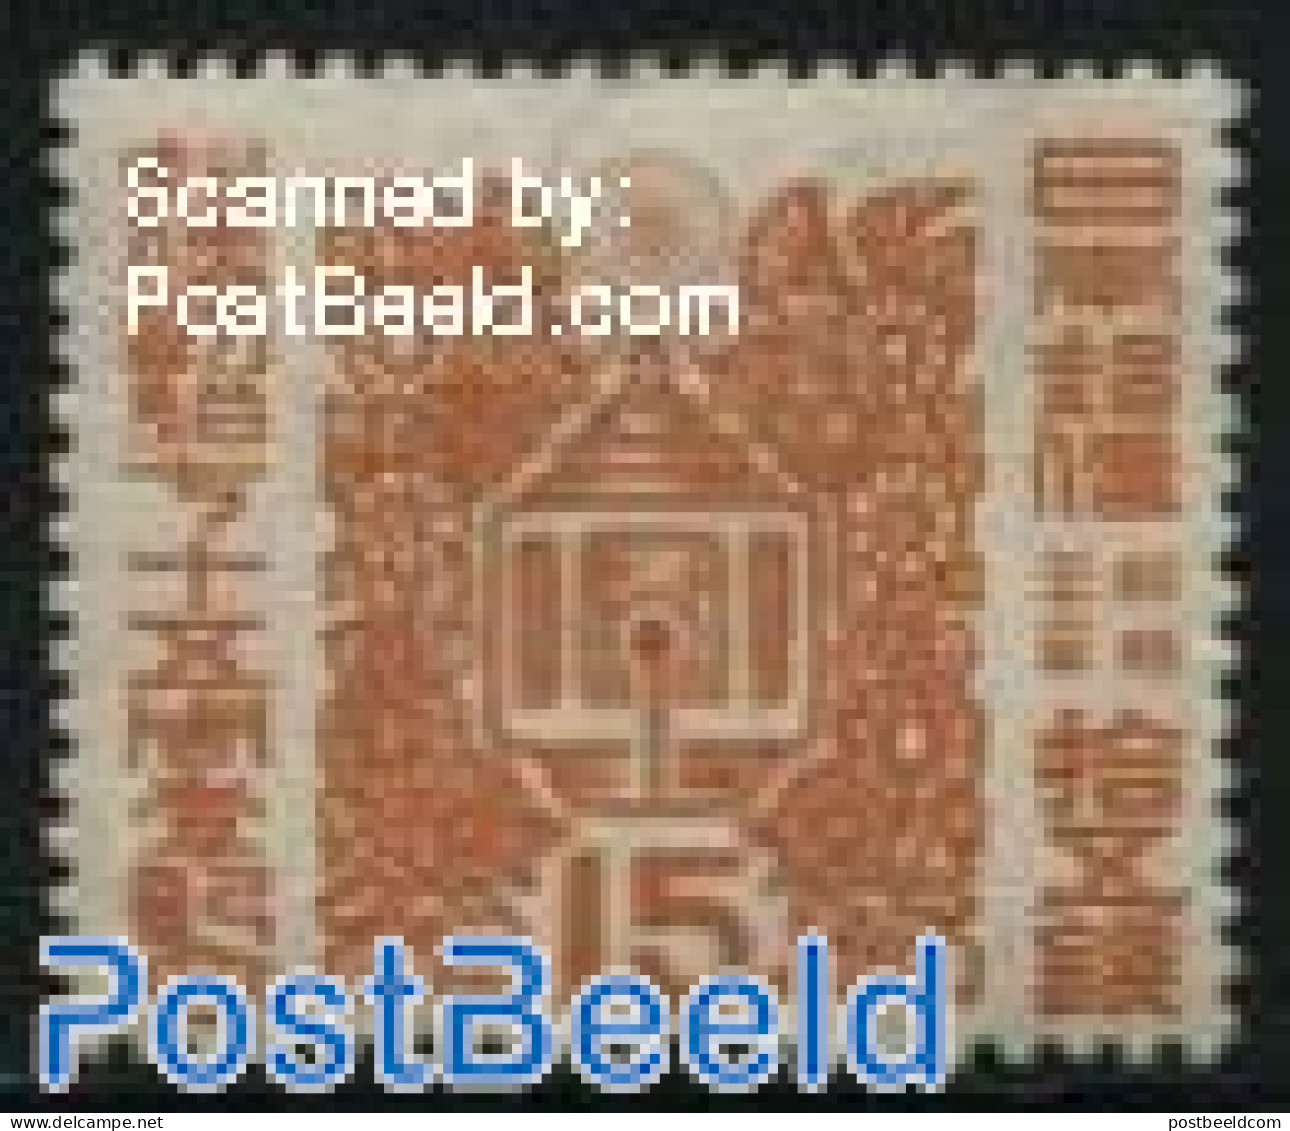 Japan 1946 15S, Stamp Out Of Set, Mint NH - Nuovi